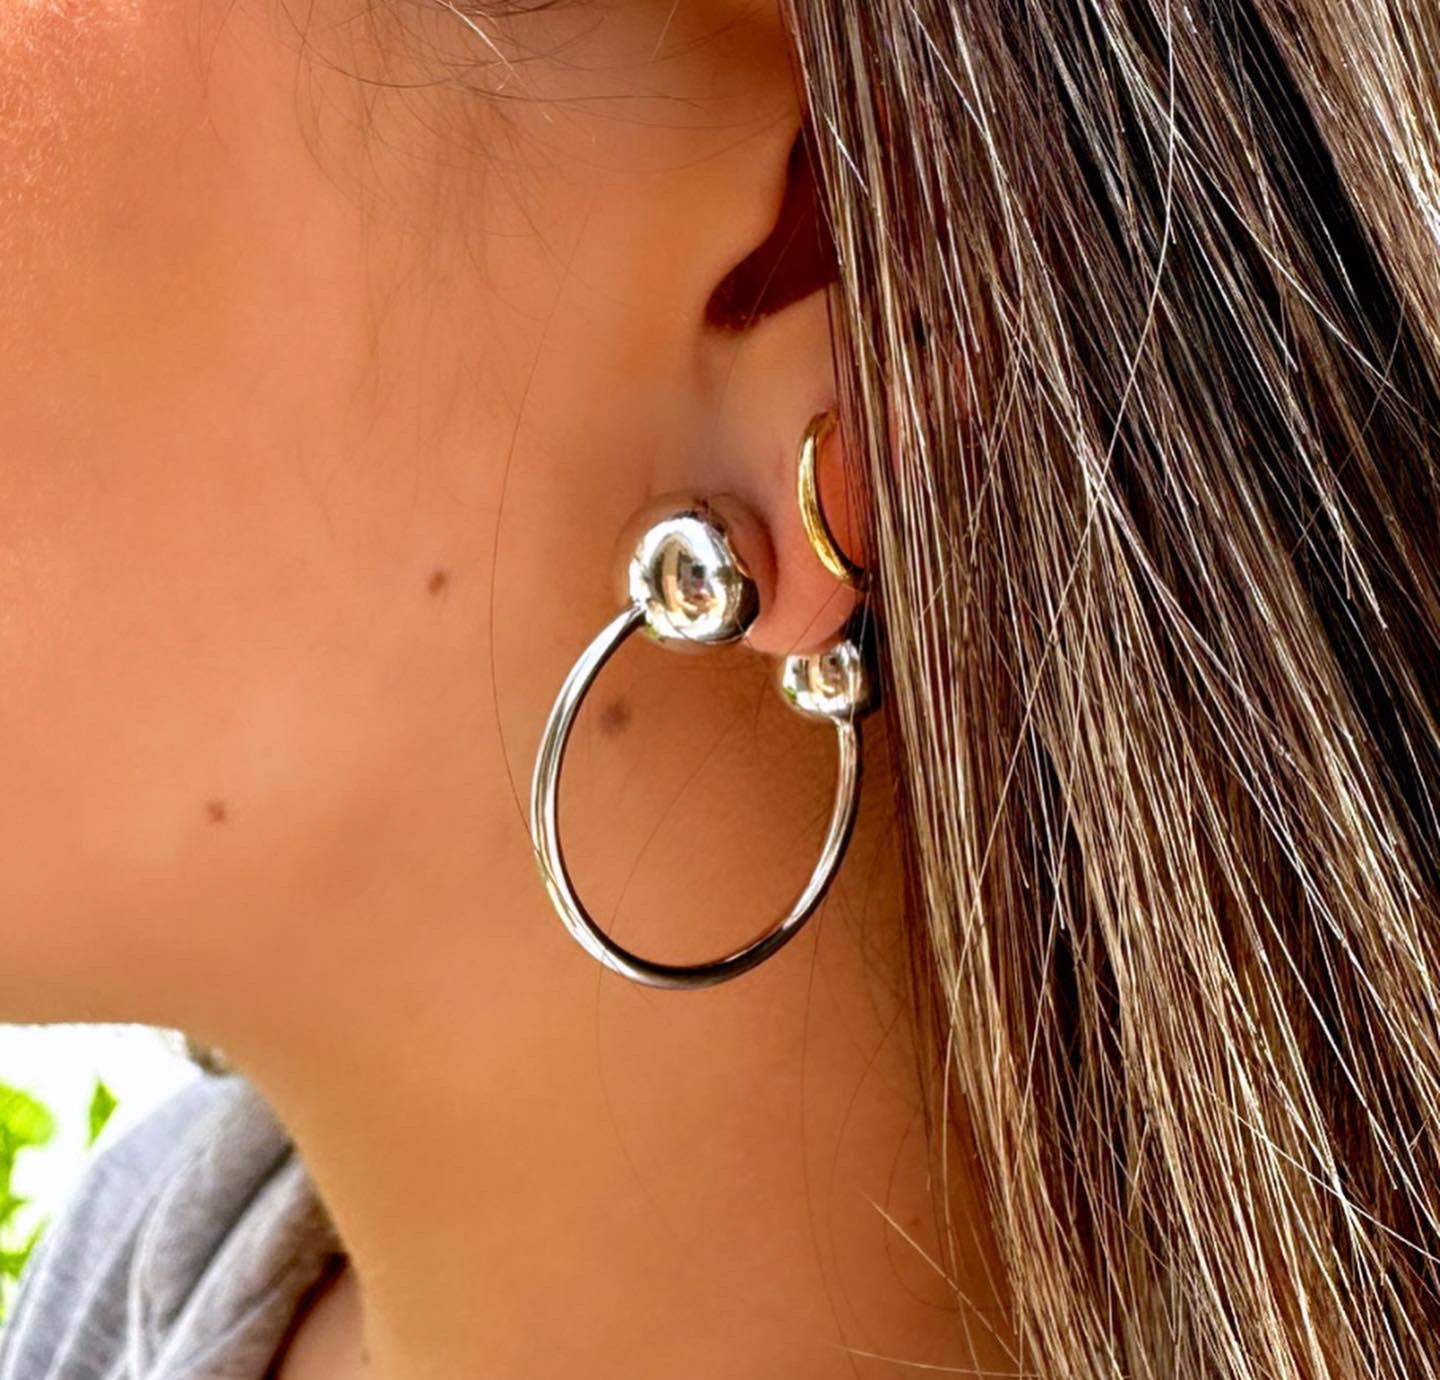 Gold & Silver Hoops